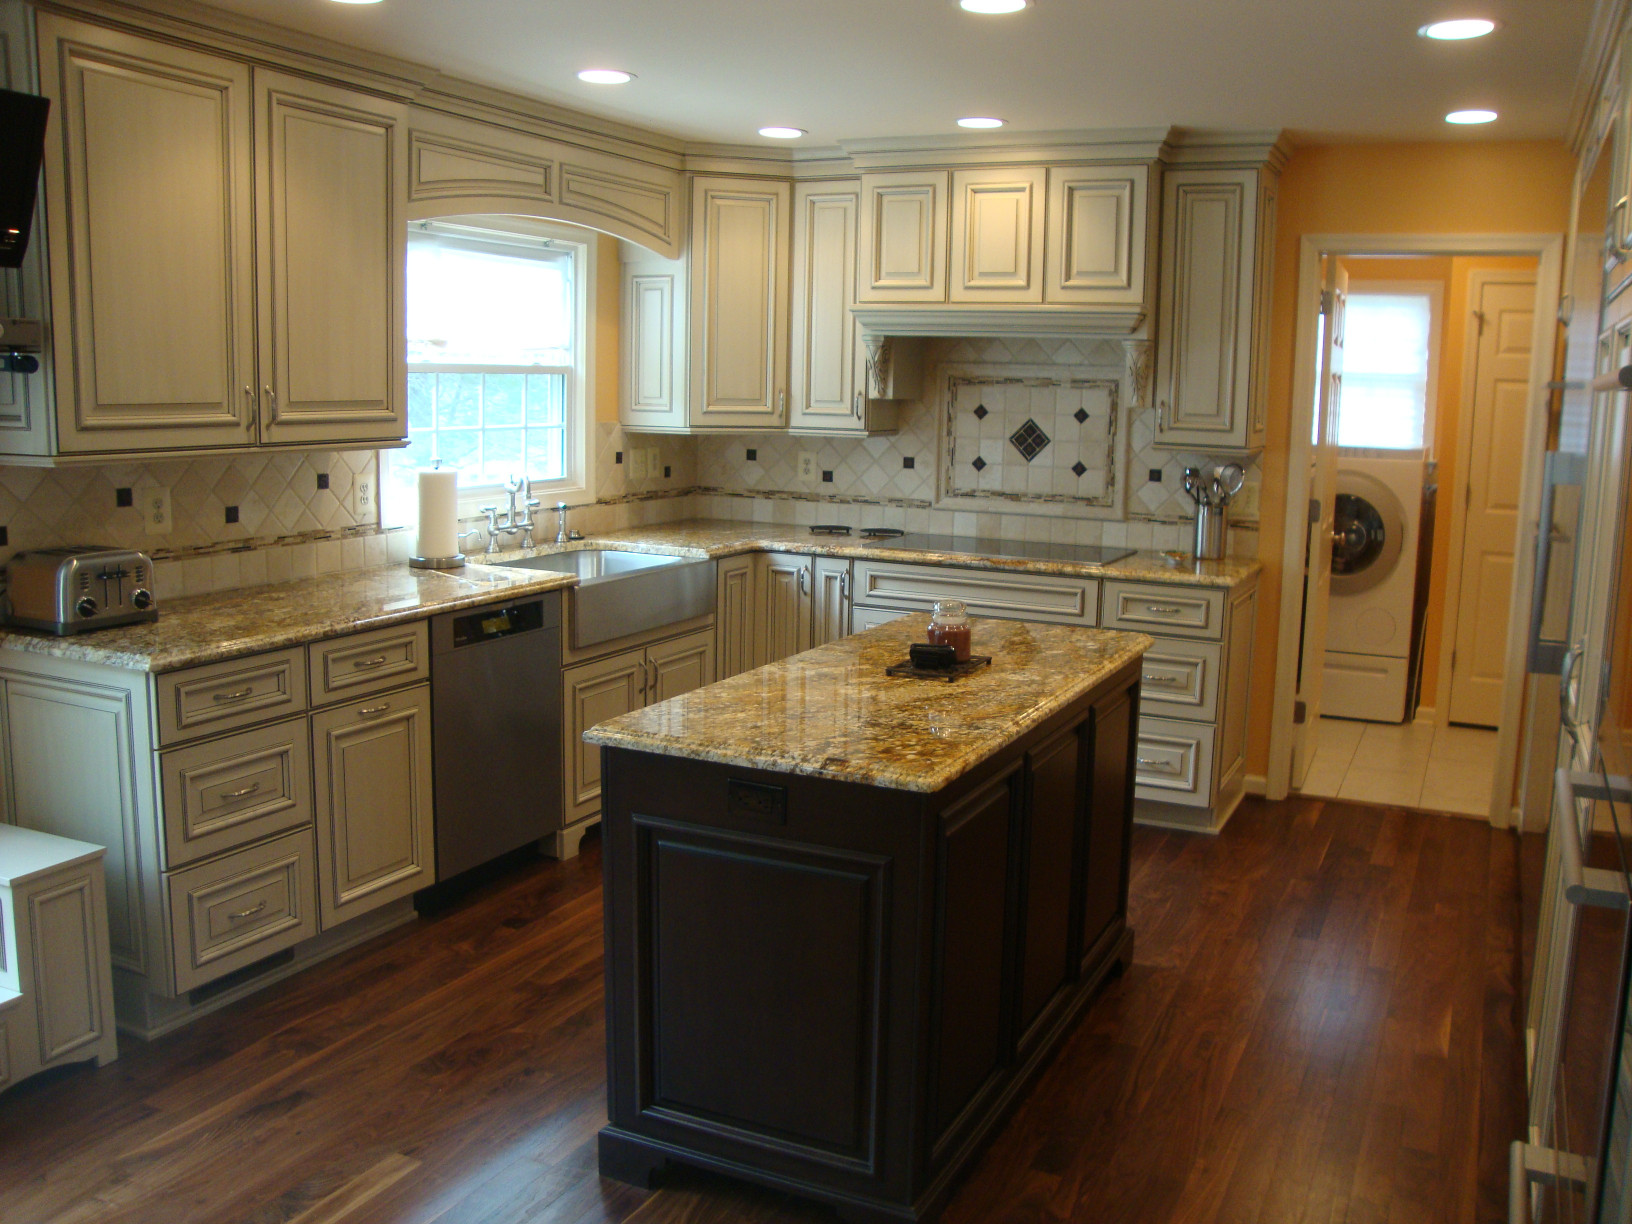 Average Cost Of Small Kitchen Remodel
 Download Kitchen Cost of kitchen island with